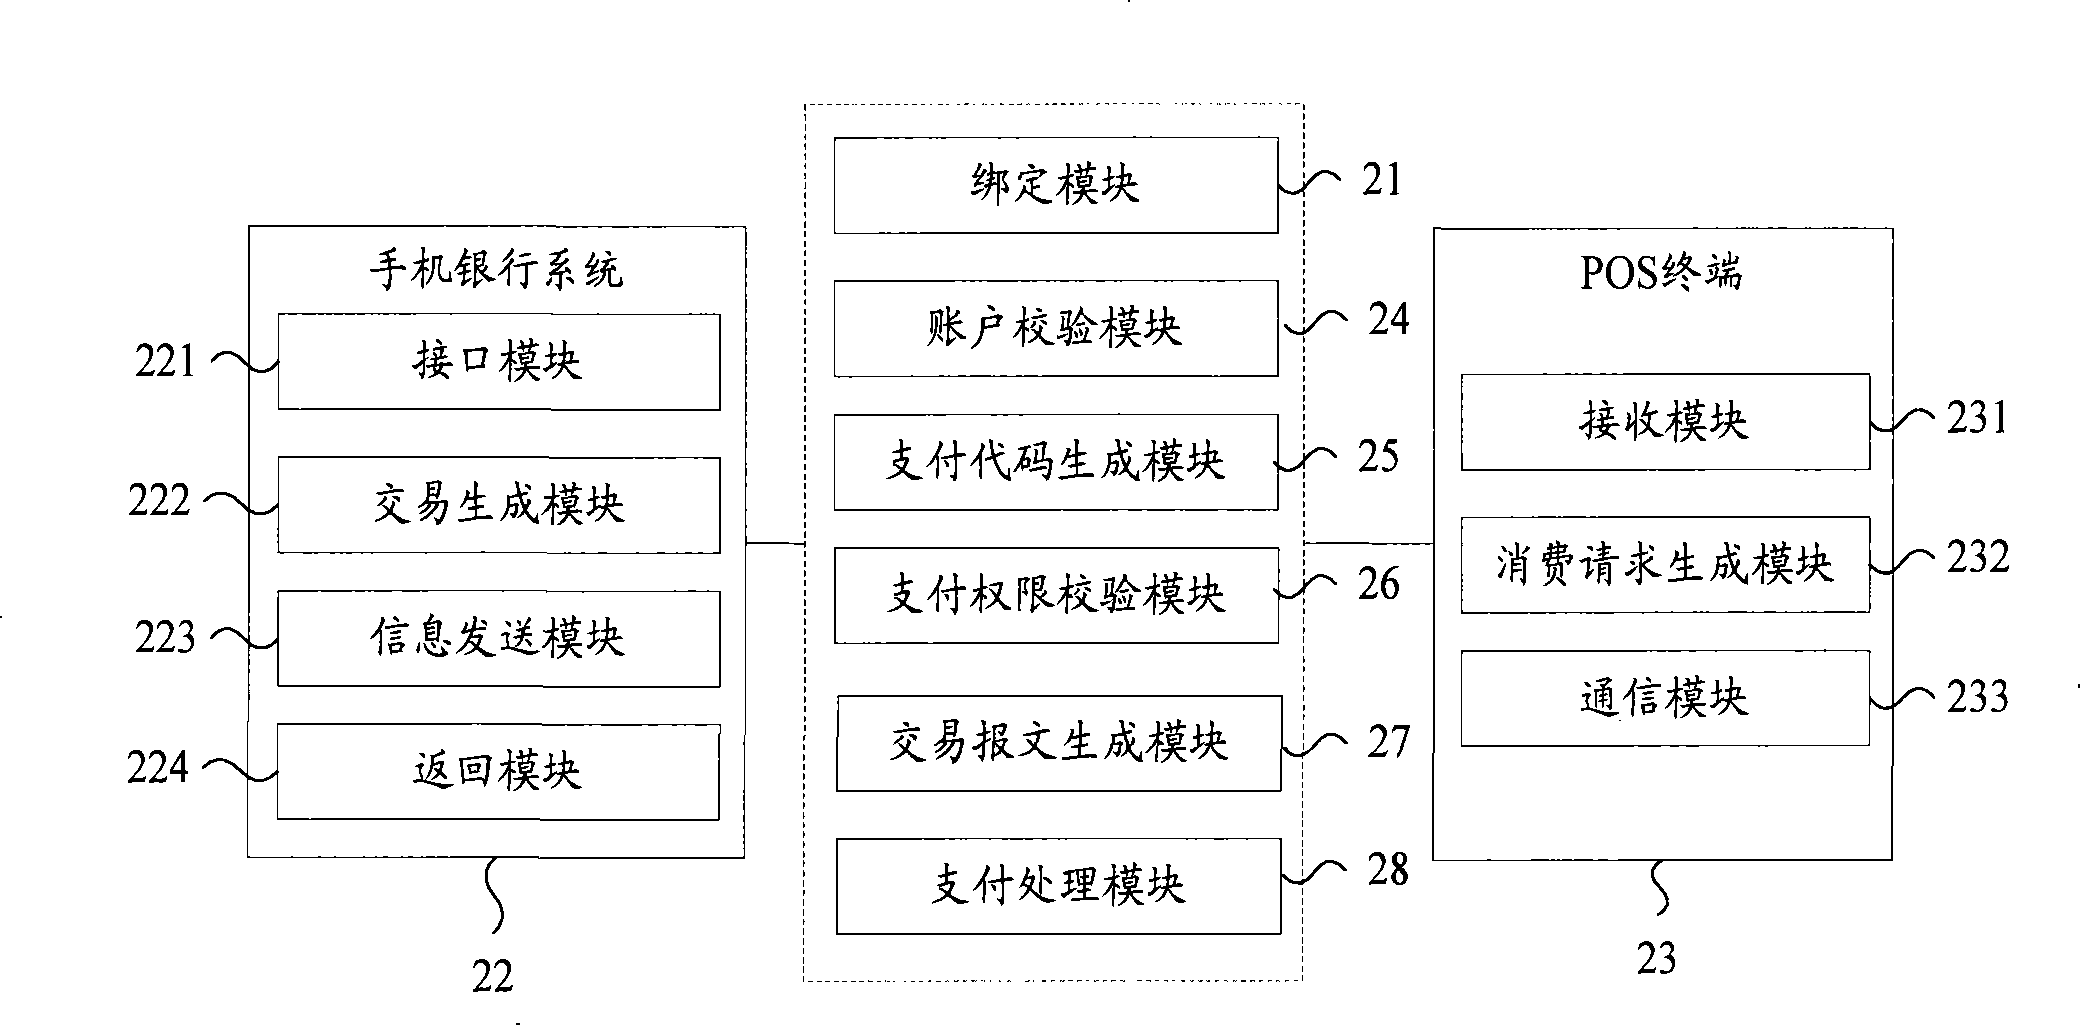 Method for processing mobile phones POS consumptive data and mobile phones POS consumption system